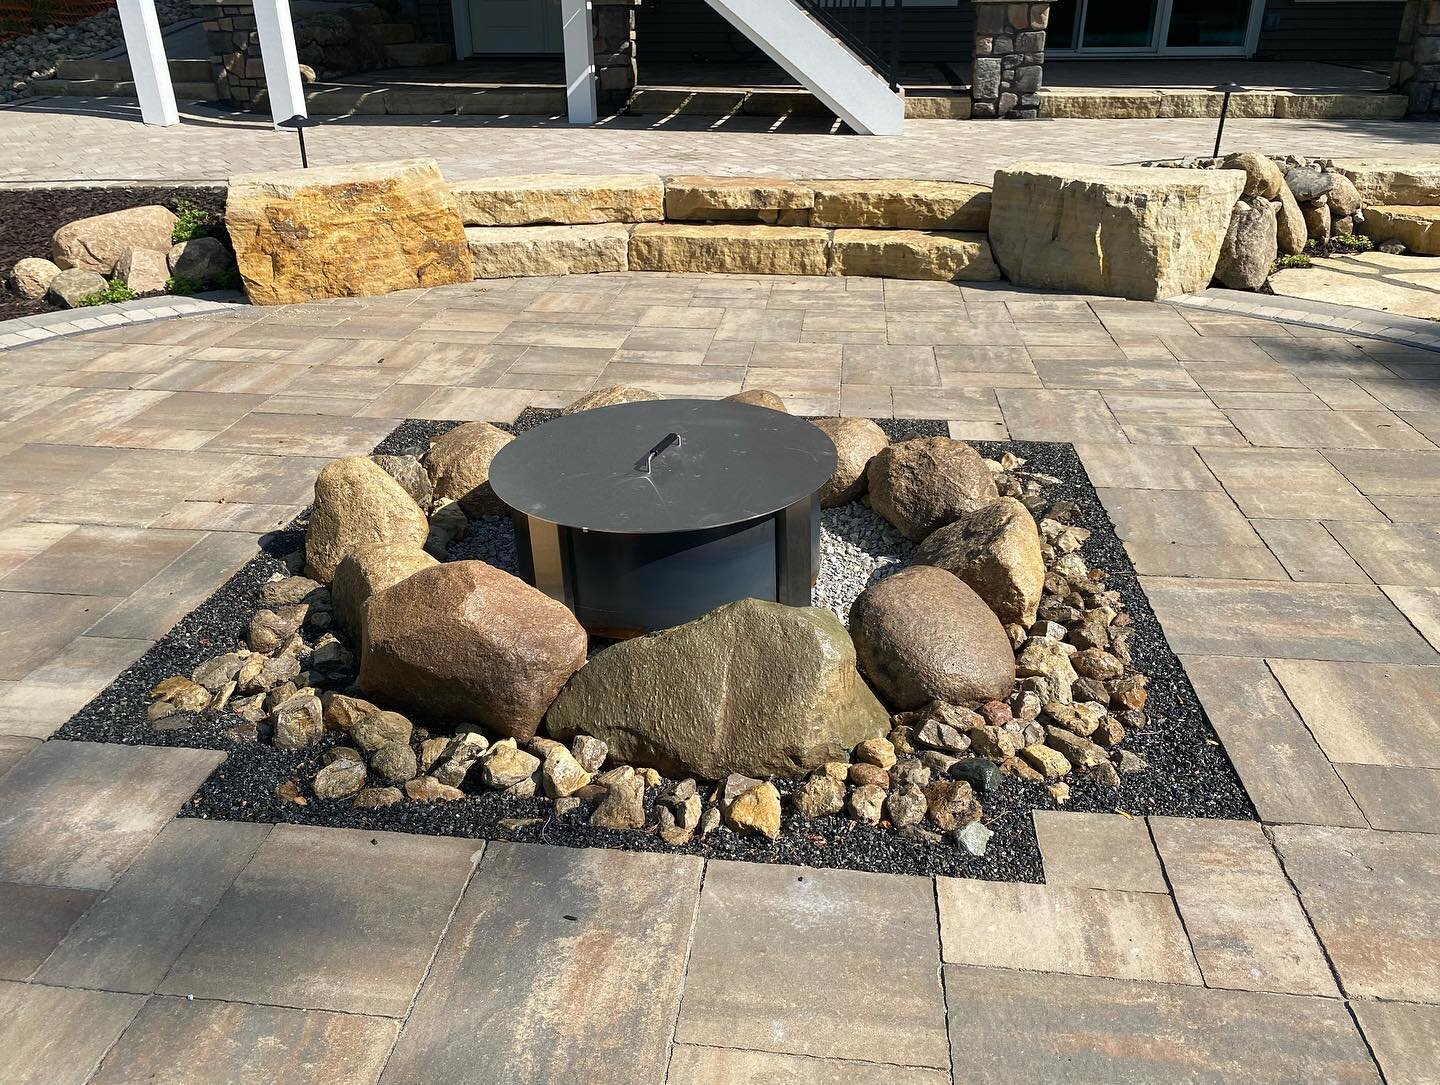 Details of a collaborative effort with our great crews, the homeowners and other contractors. This Hardscape we designed and installed was a joy for us to be involved with. The fire pit detail was designed as a large drain for the upper patio using a